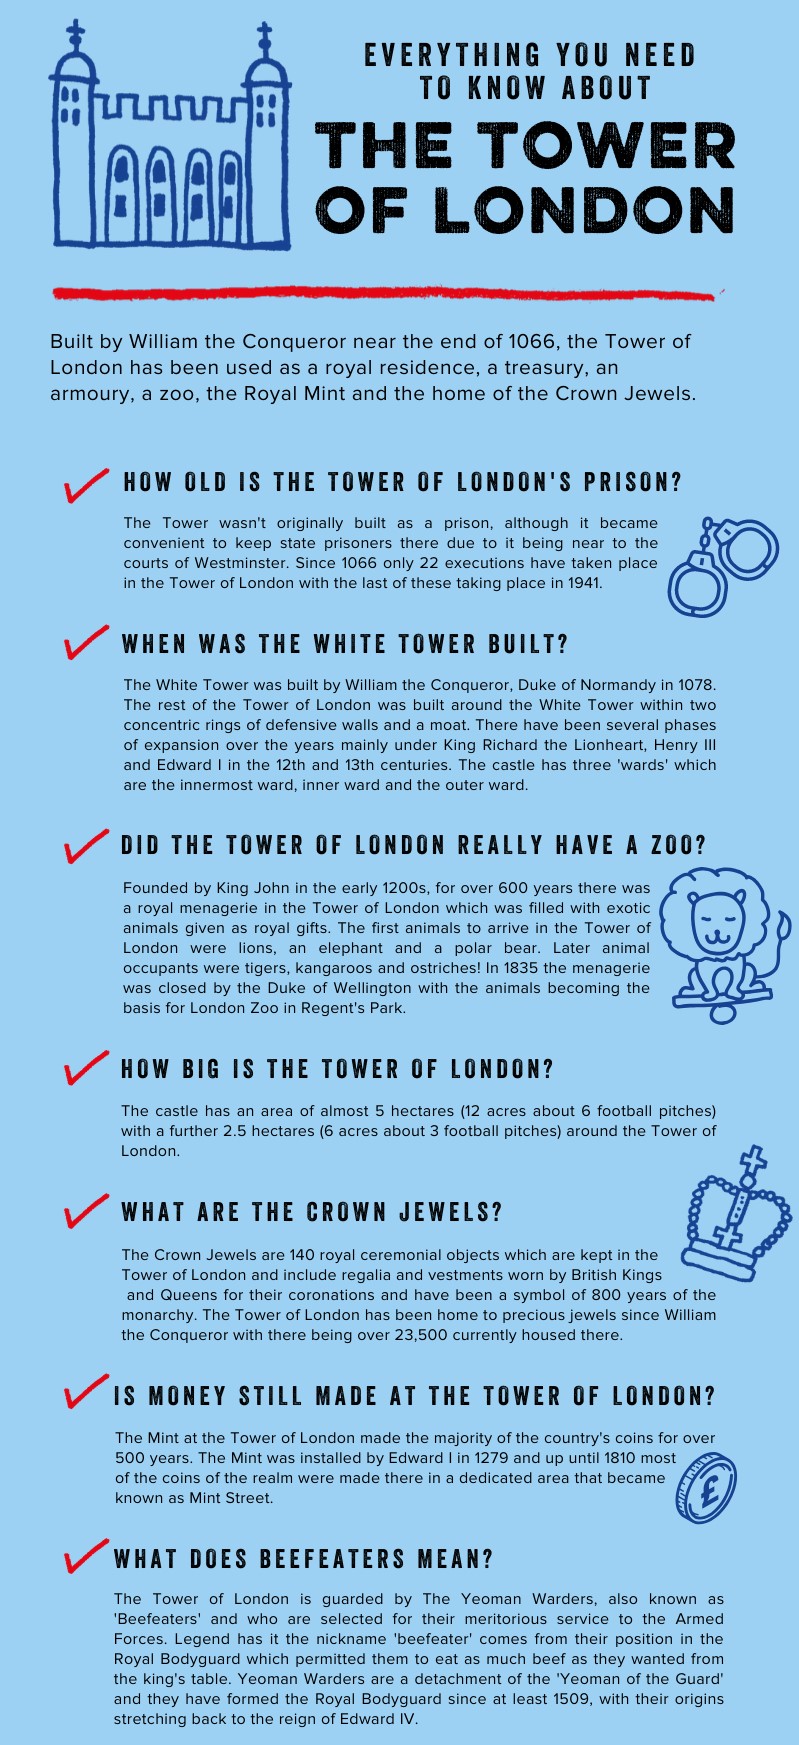 Everything you need to know about the Tower of London